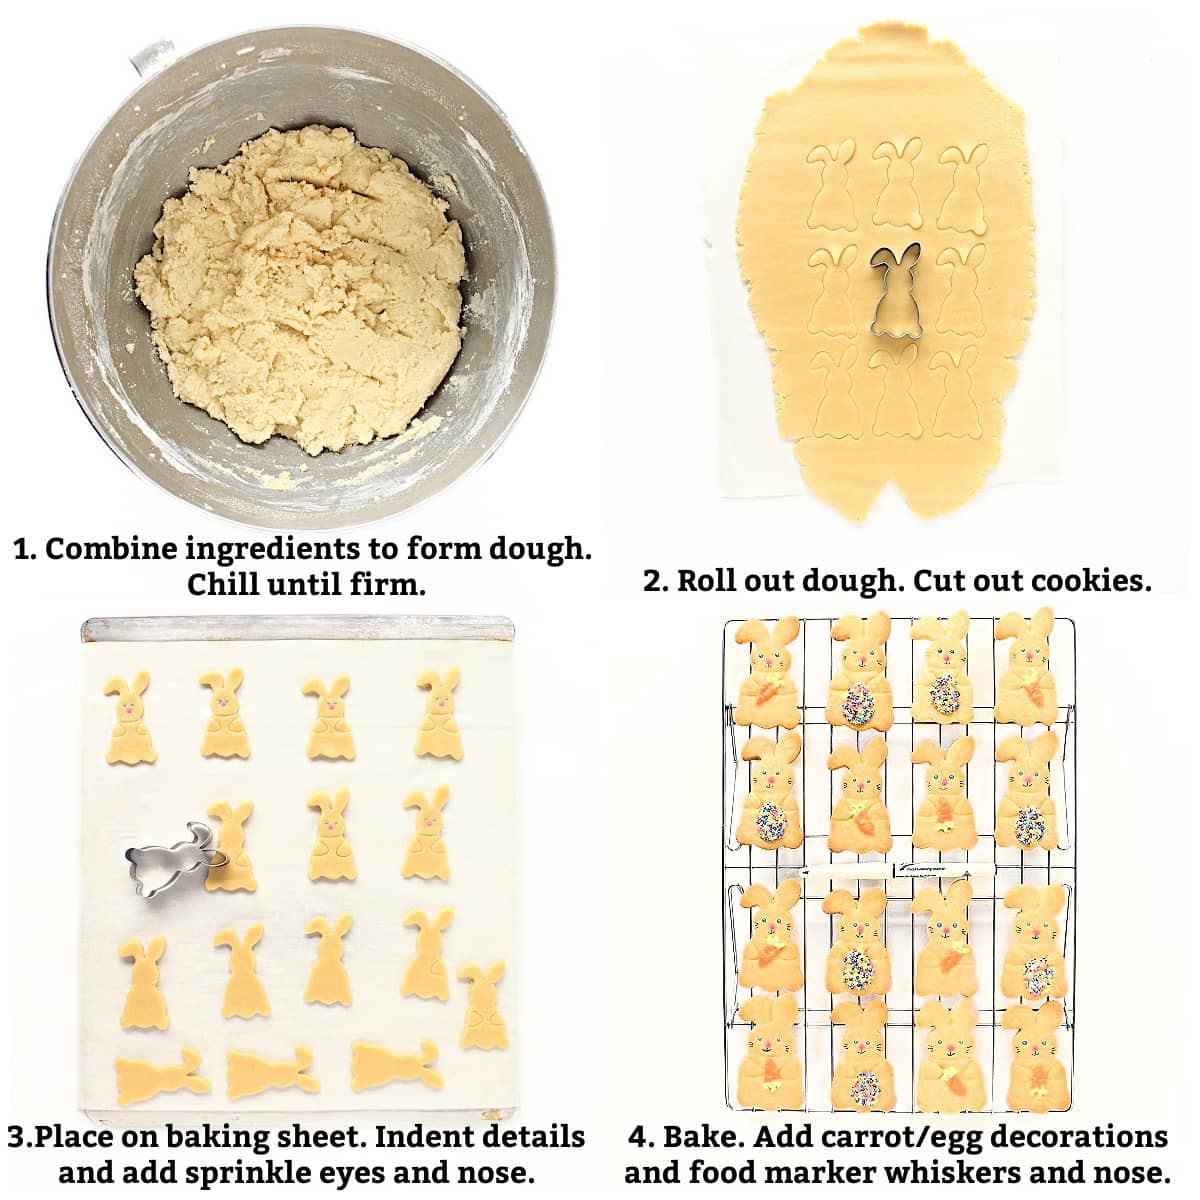 Instructions: mix ingredients for dough, roll out dough, cut out cookies, add sprinkles, bake, add decorations.